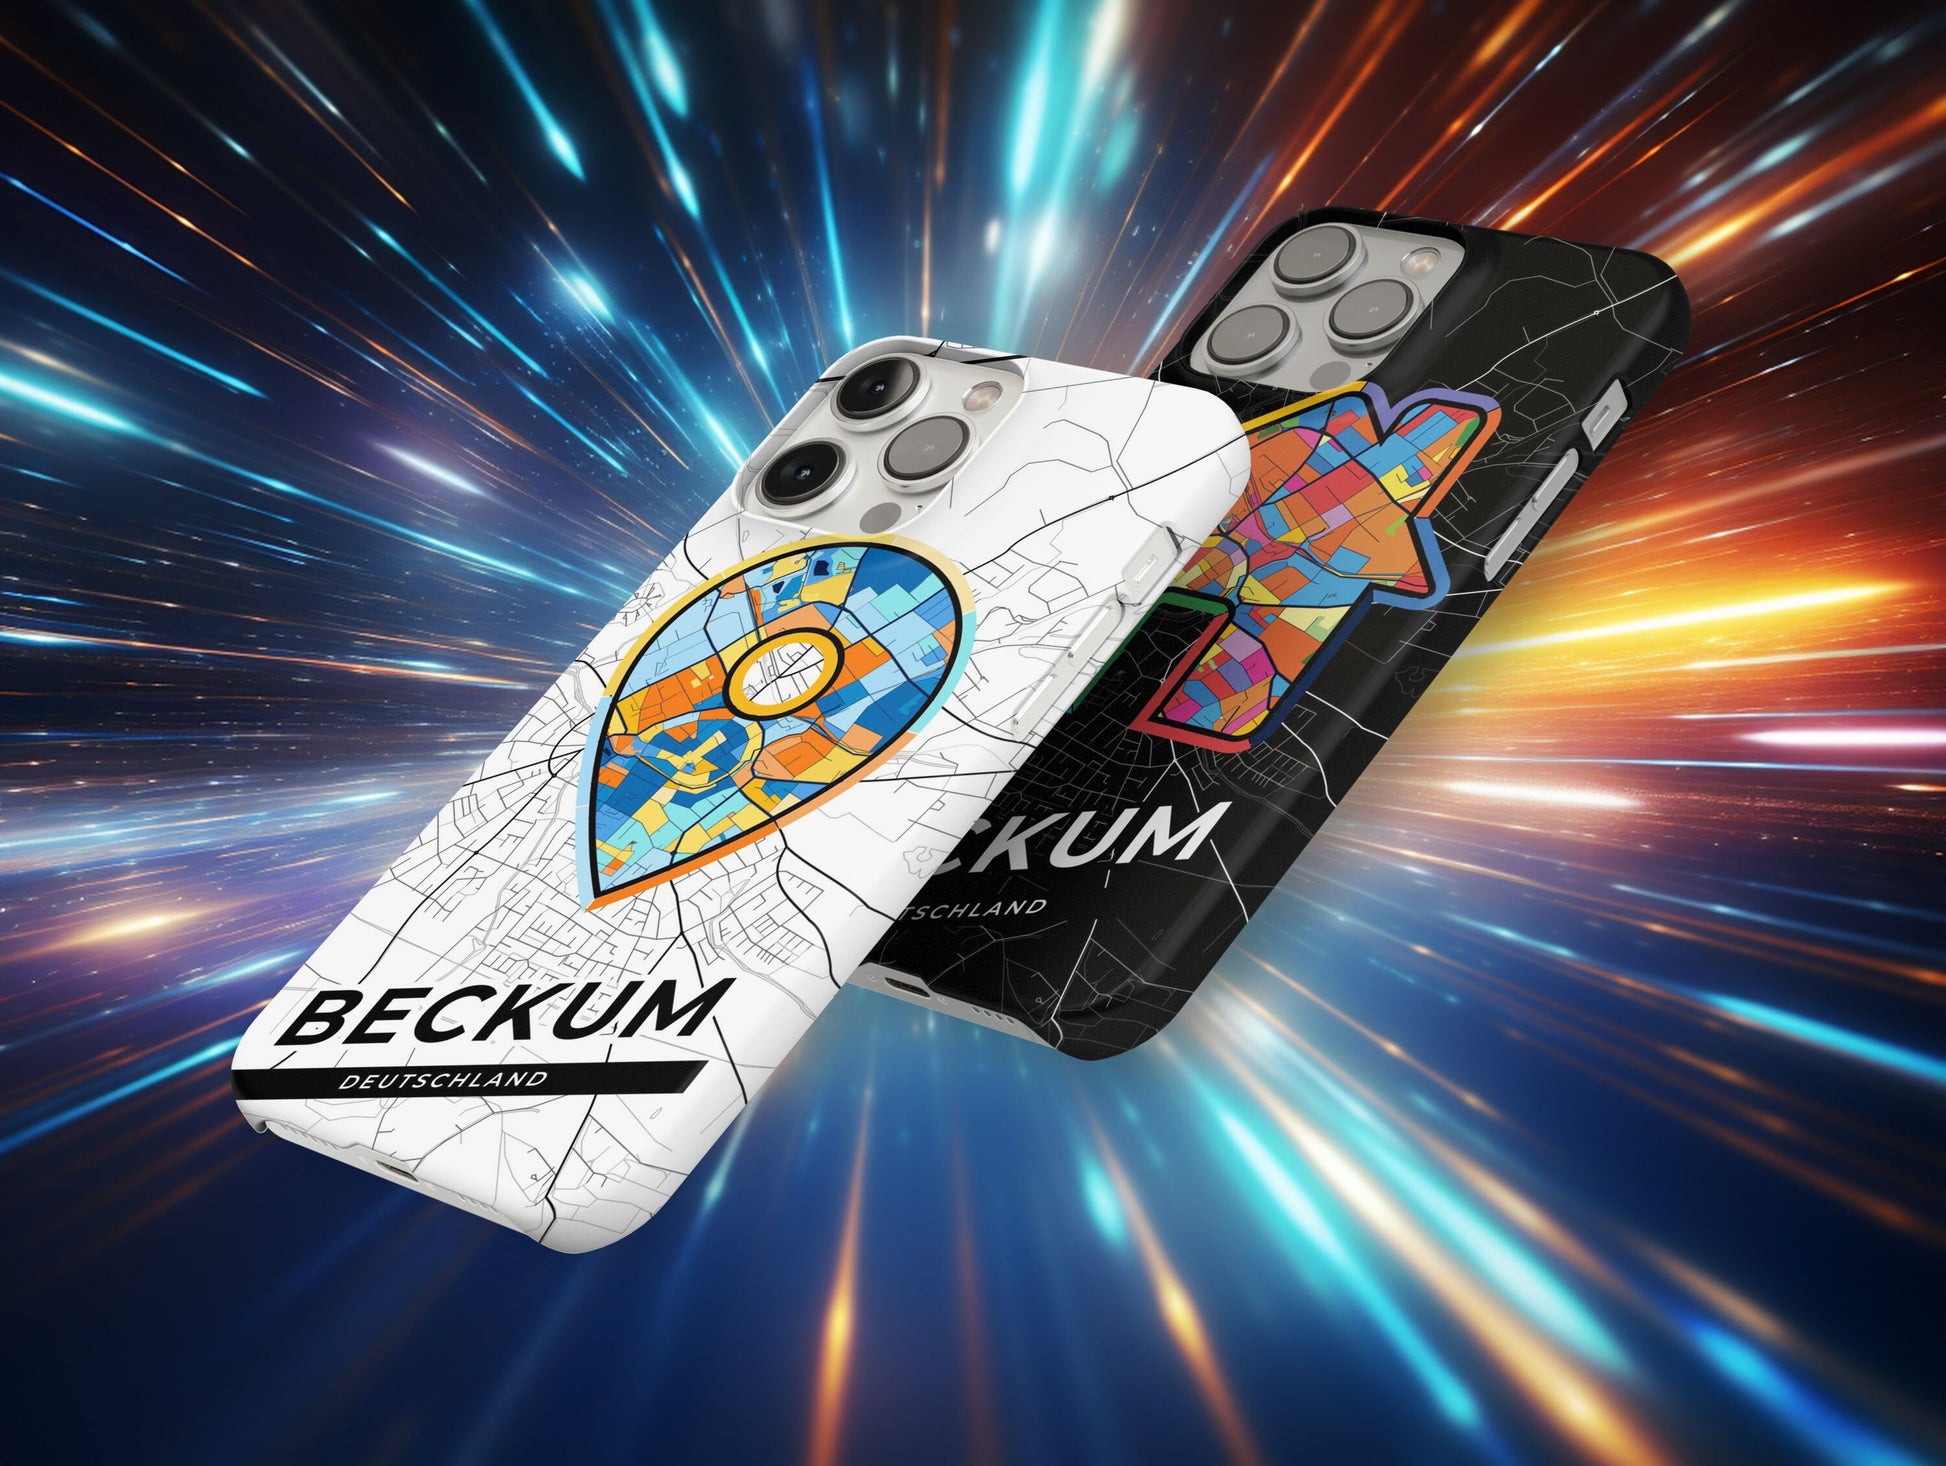 Beckum Deutschland slim phone case with colorful icon. Birthday, wedding or housewarming gift. Couple match cases.